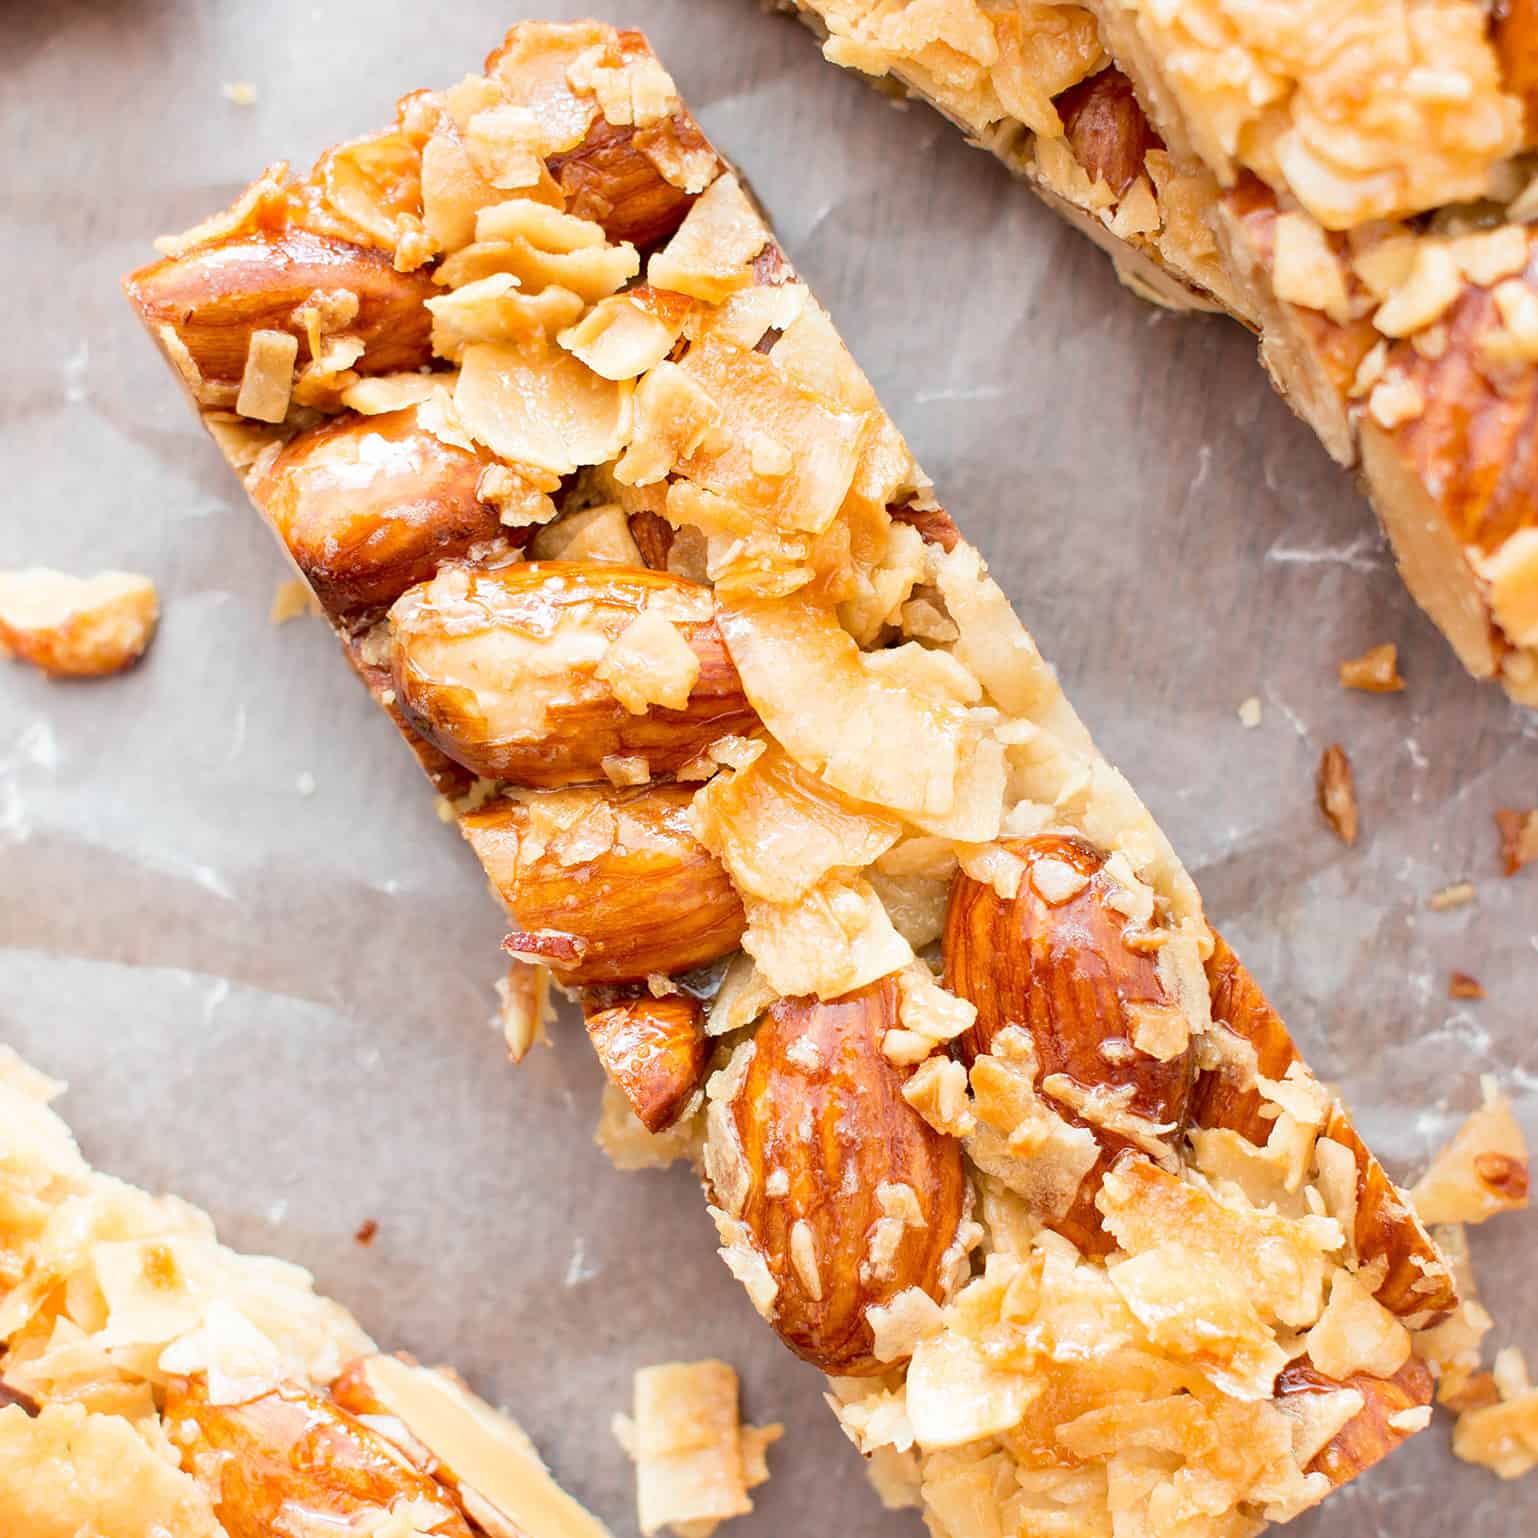 3 Ingredient Homemade KIND Coconut Almond Bar Recipe (V, GF): an easy recipe for homemade paleo KIND bars packed with crunchy almonds and sweet coconut. #Paleo #Vegan #GlutenFree #DairyFree #Healthy #Snacks | Recipe on BeamingBaker.com 